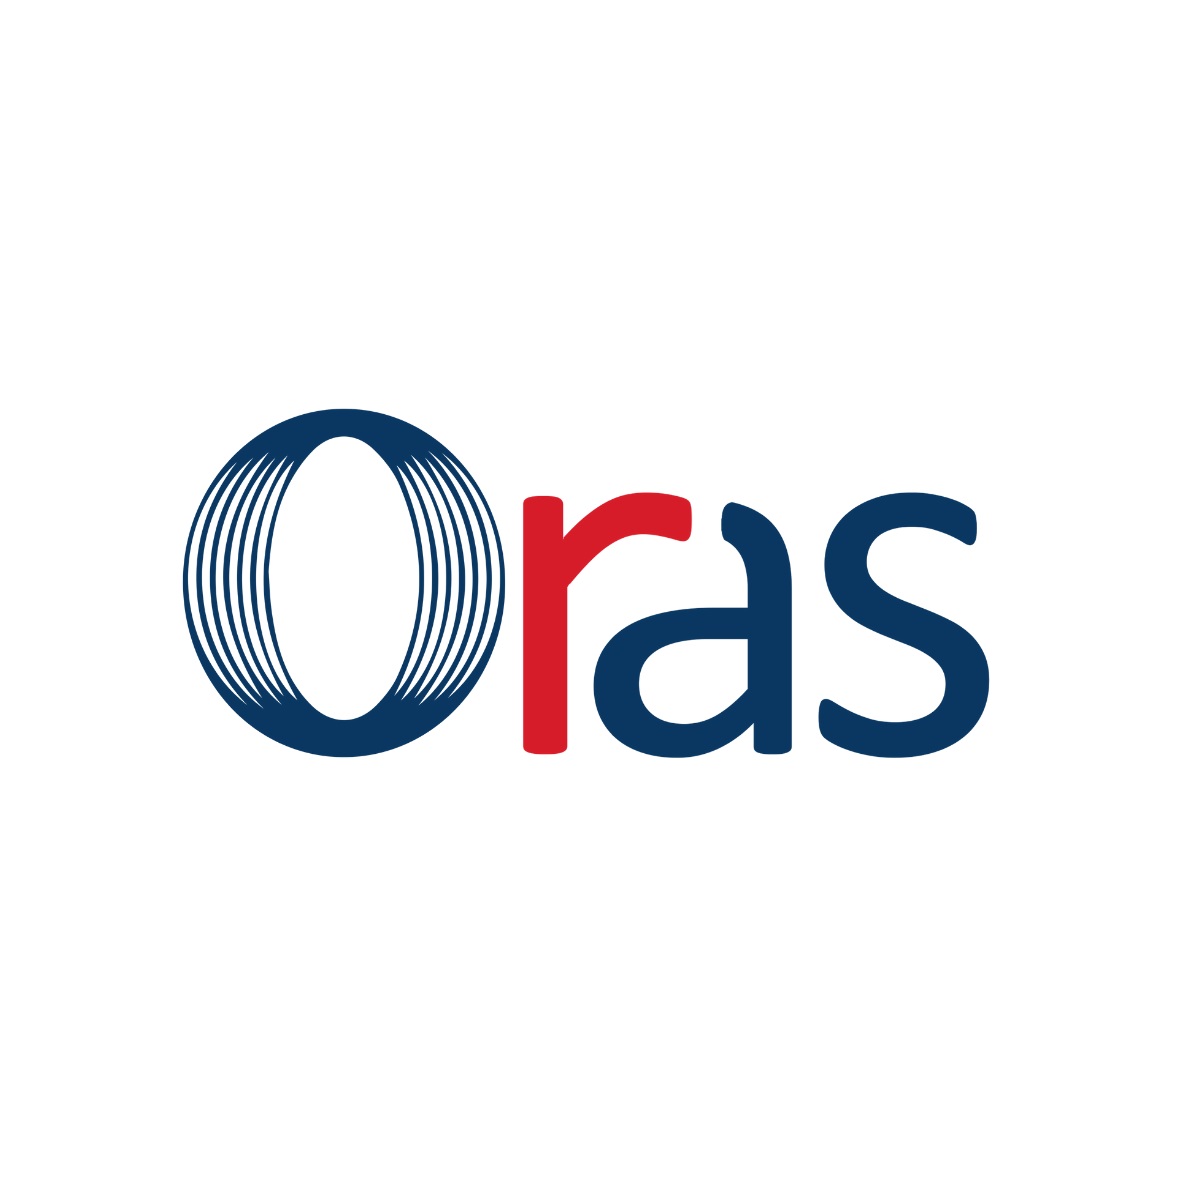 Logo of Oras Medical Medical Equipment And Supplies In Rugby, Warwickshire